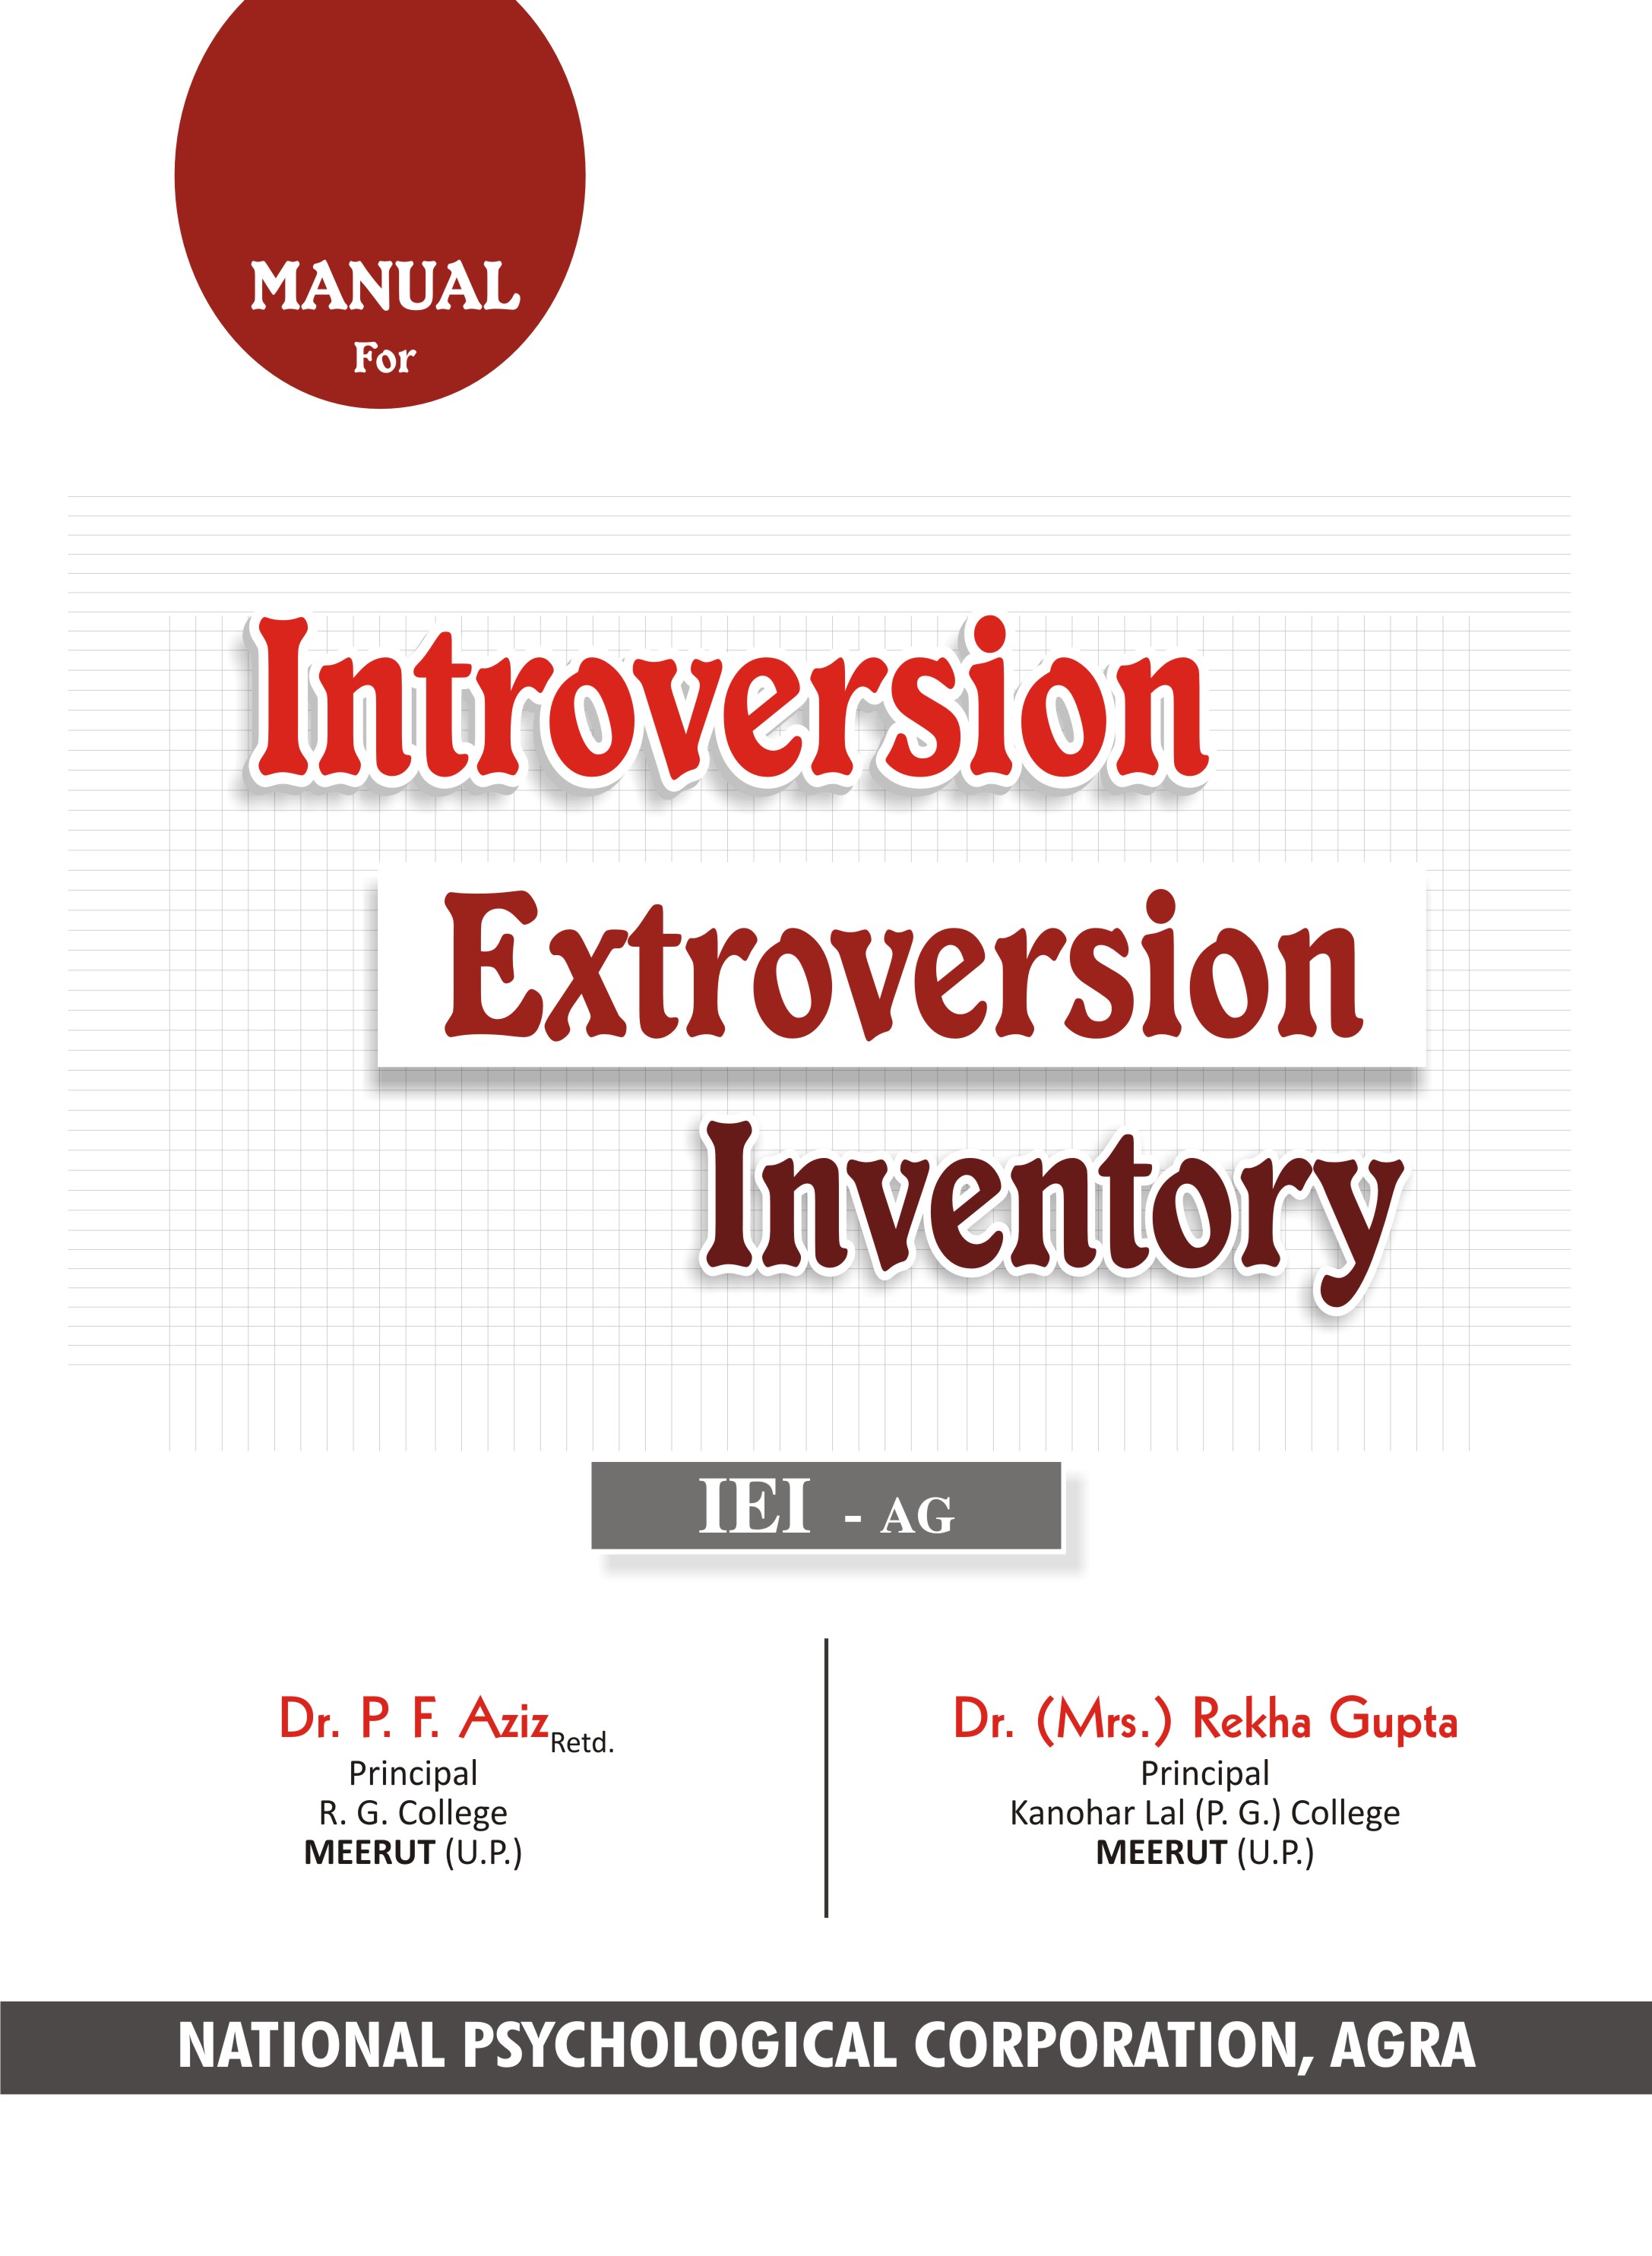 INTROVERSION-EXTROVERSION-INVENTORY